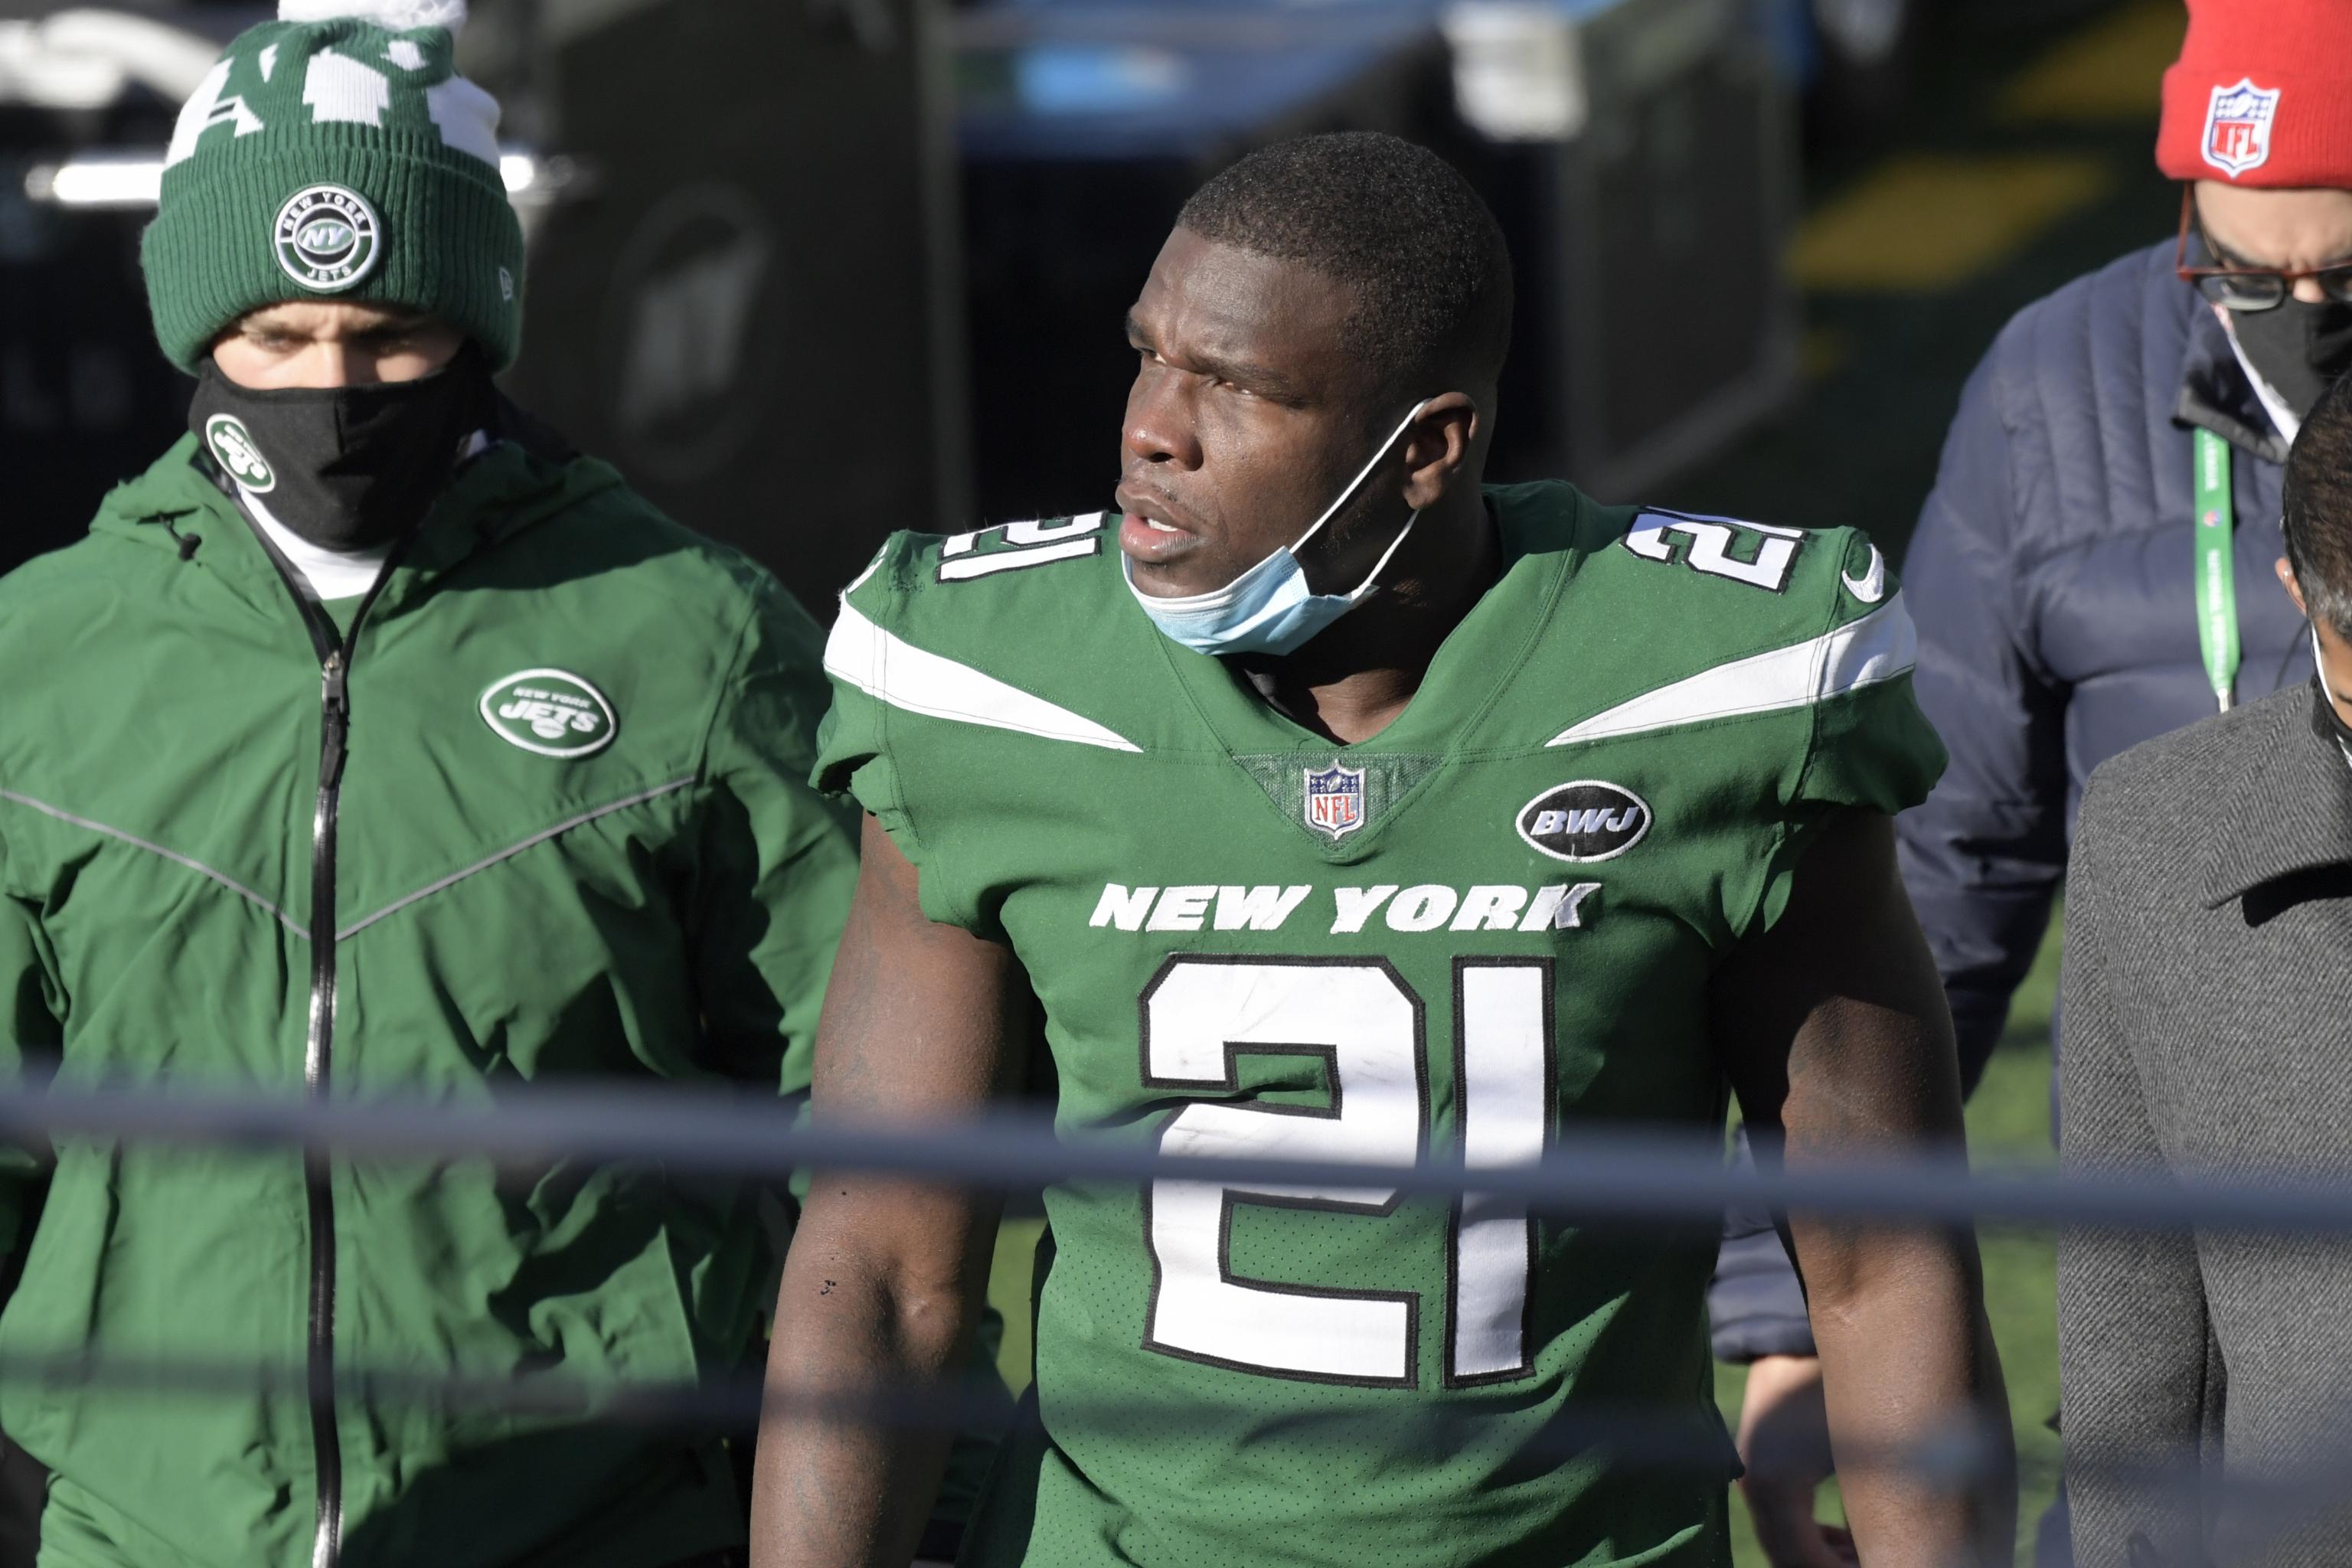 Frank Gore, New York Jets HB, NFL and PFF stats